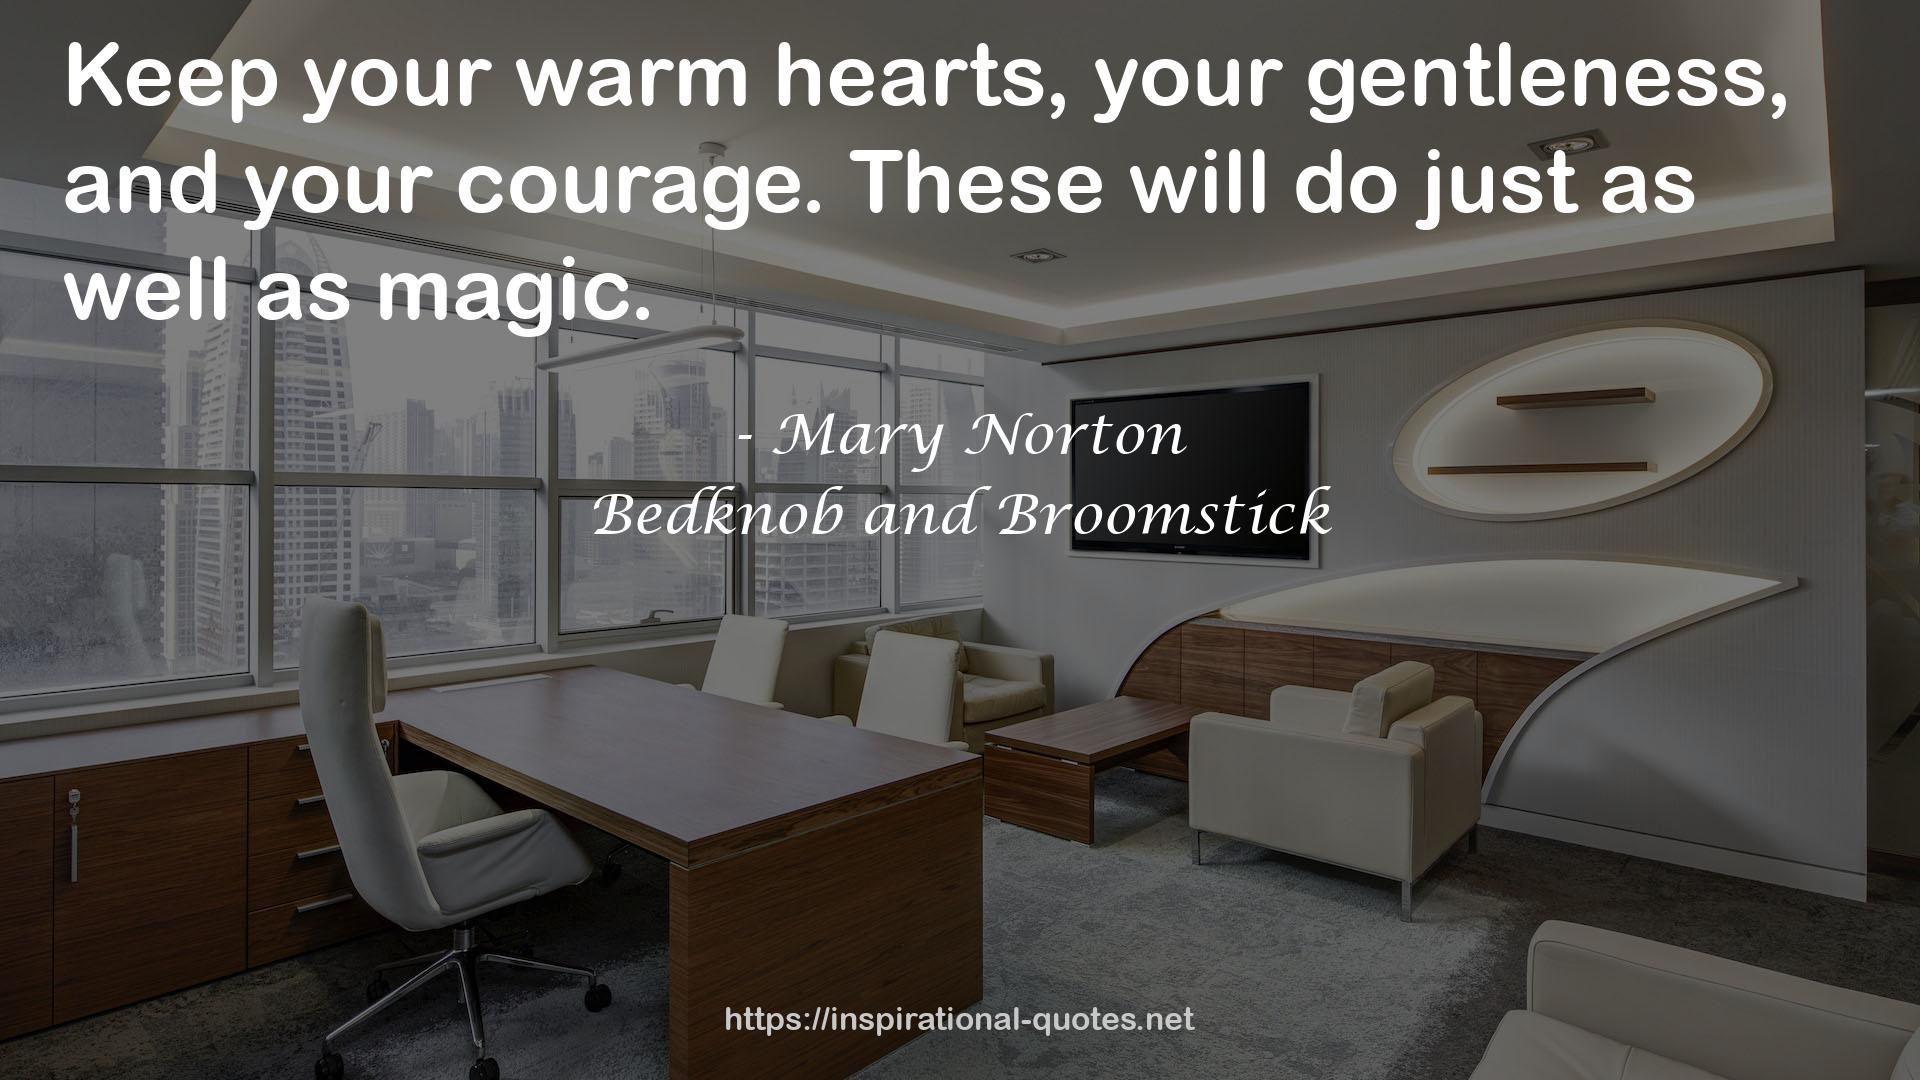 Bedknob and Broomstick QUOTES